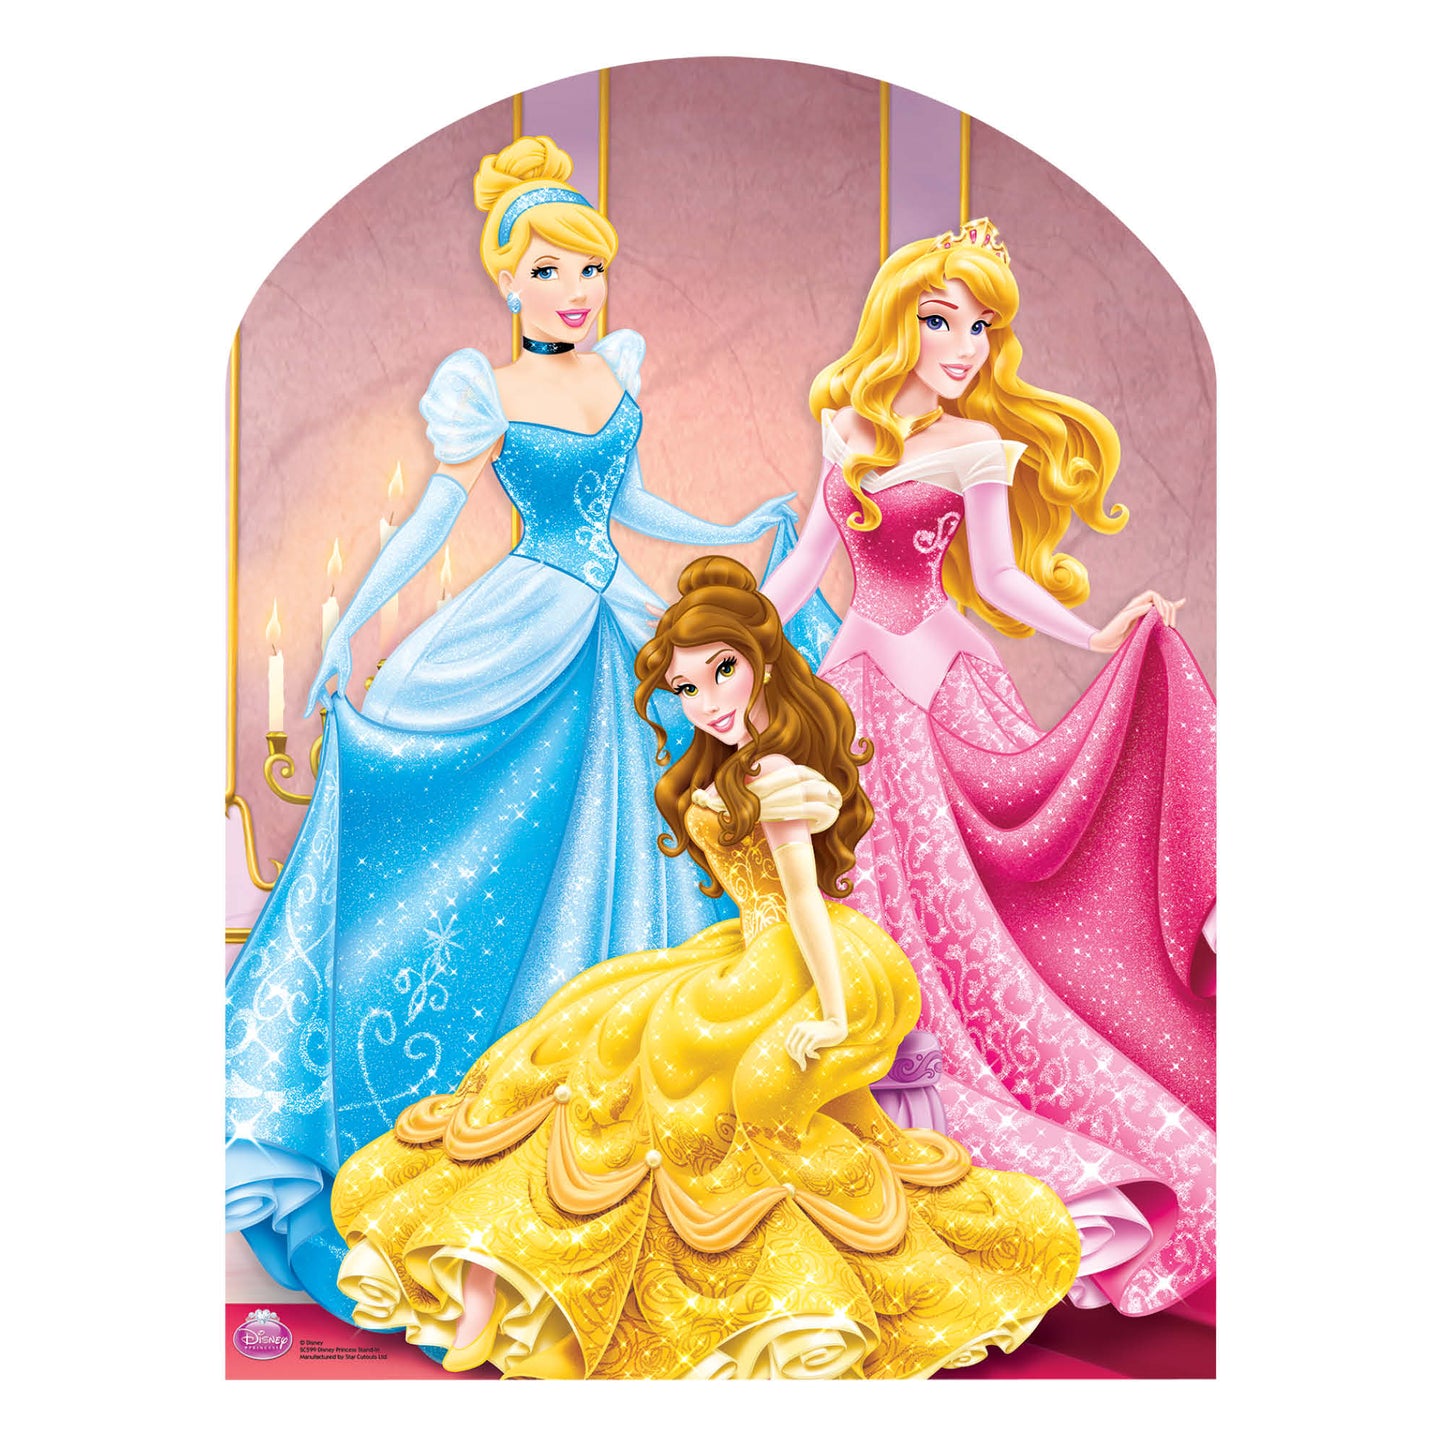 Official Princess Stand In Cardboard Cutout